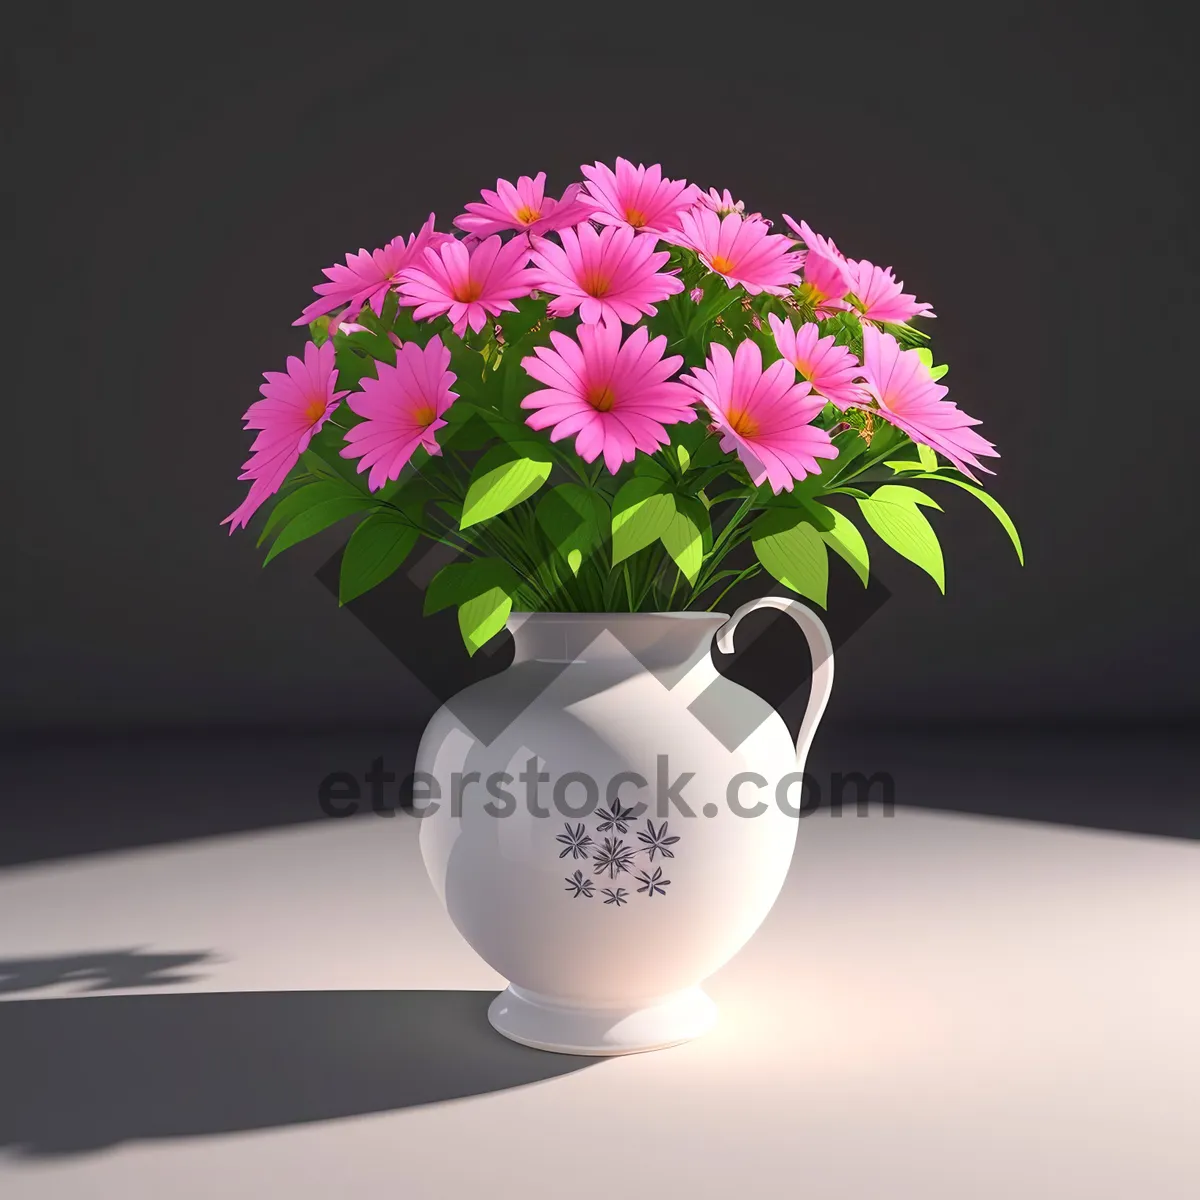 Picture of Pink flower bouquet in stylish vase